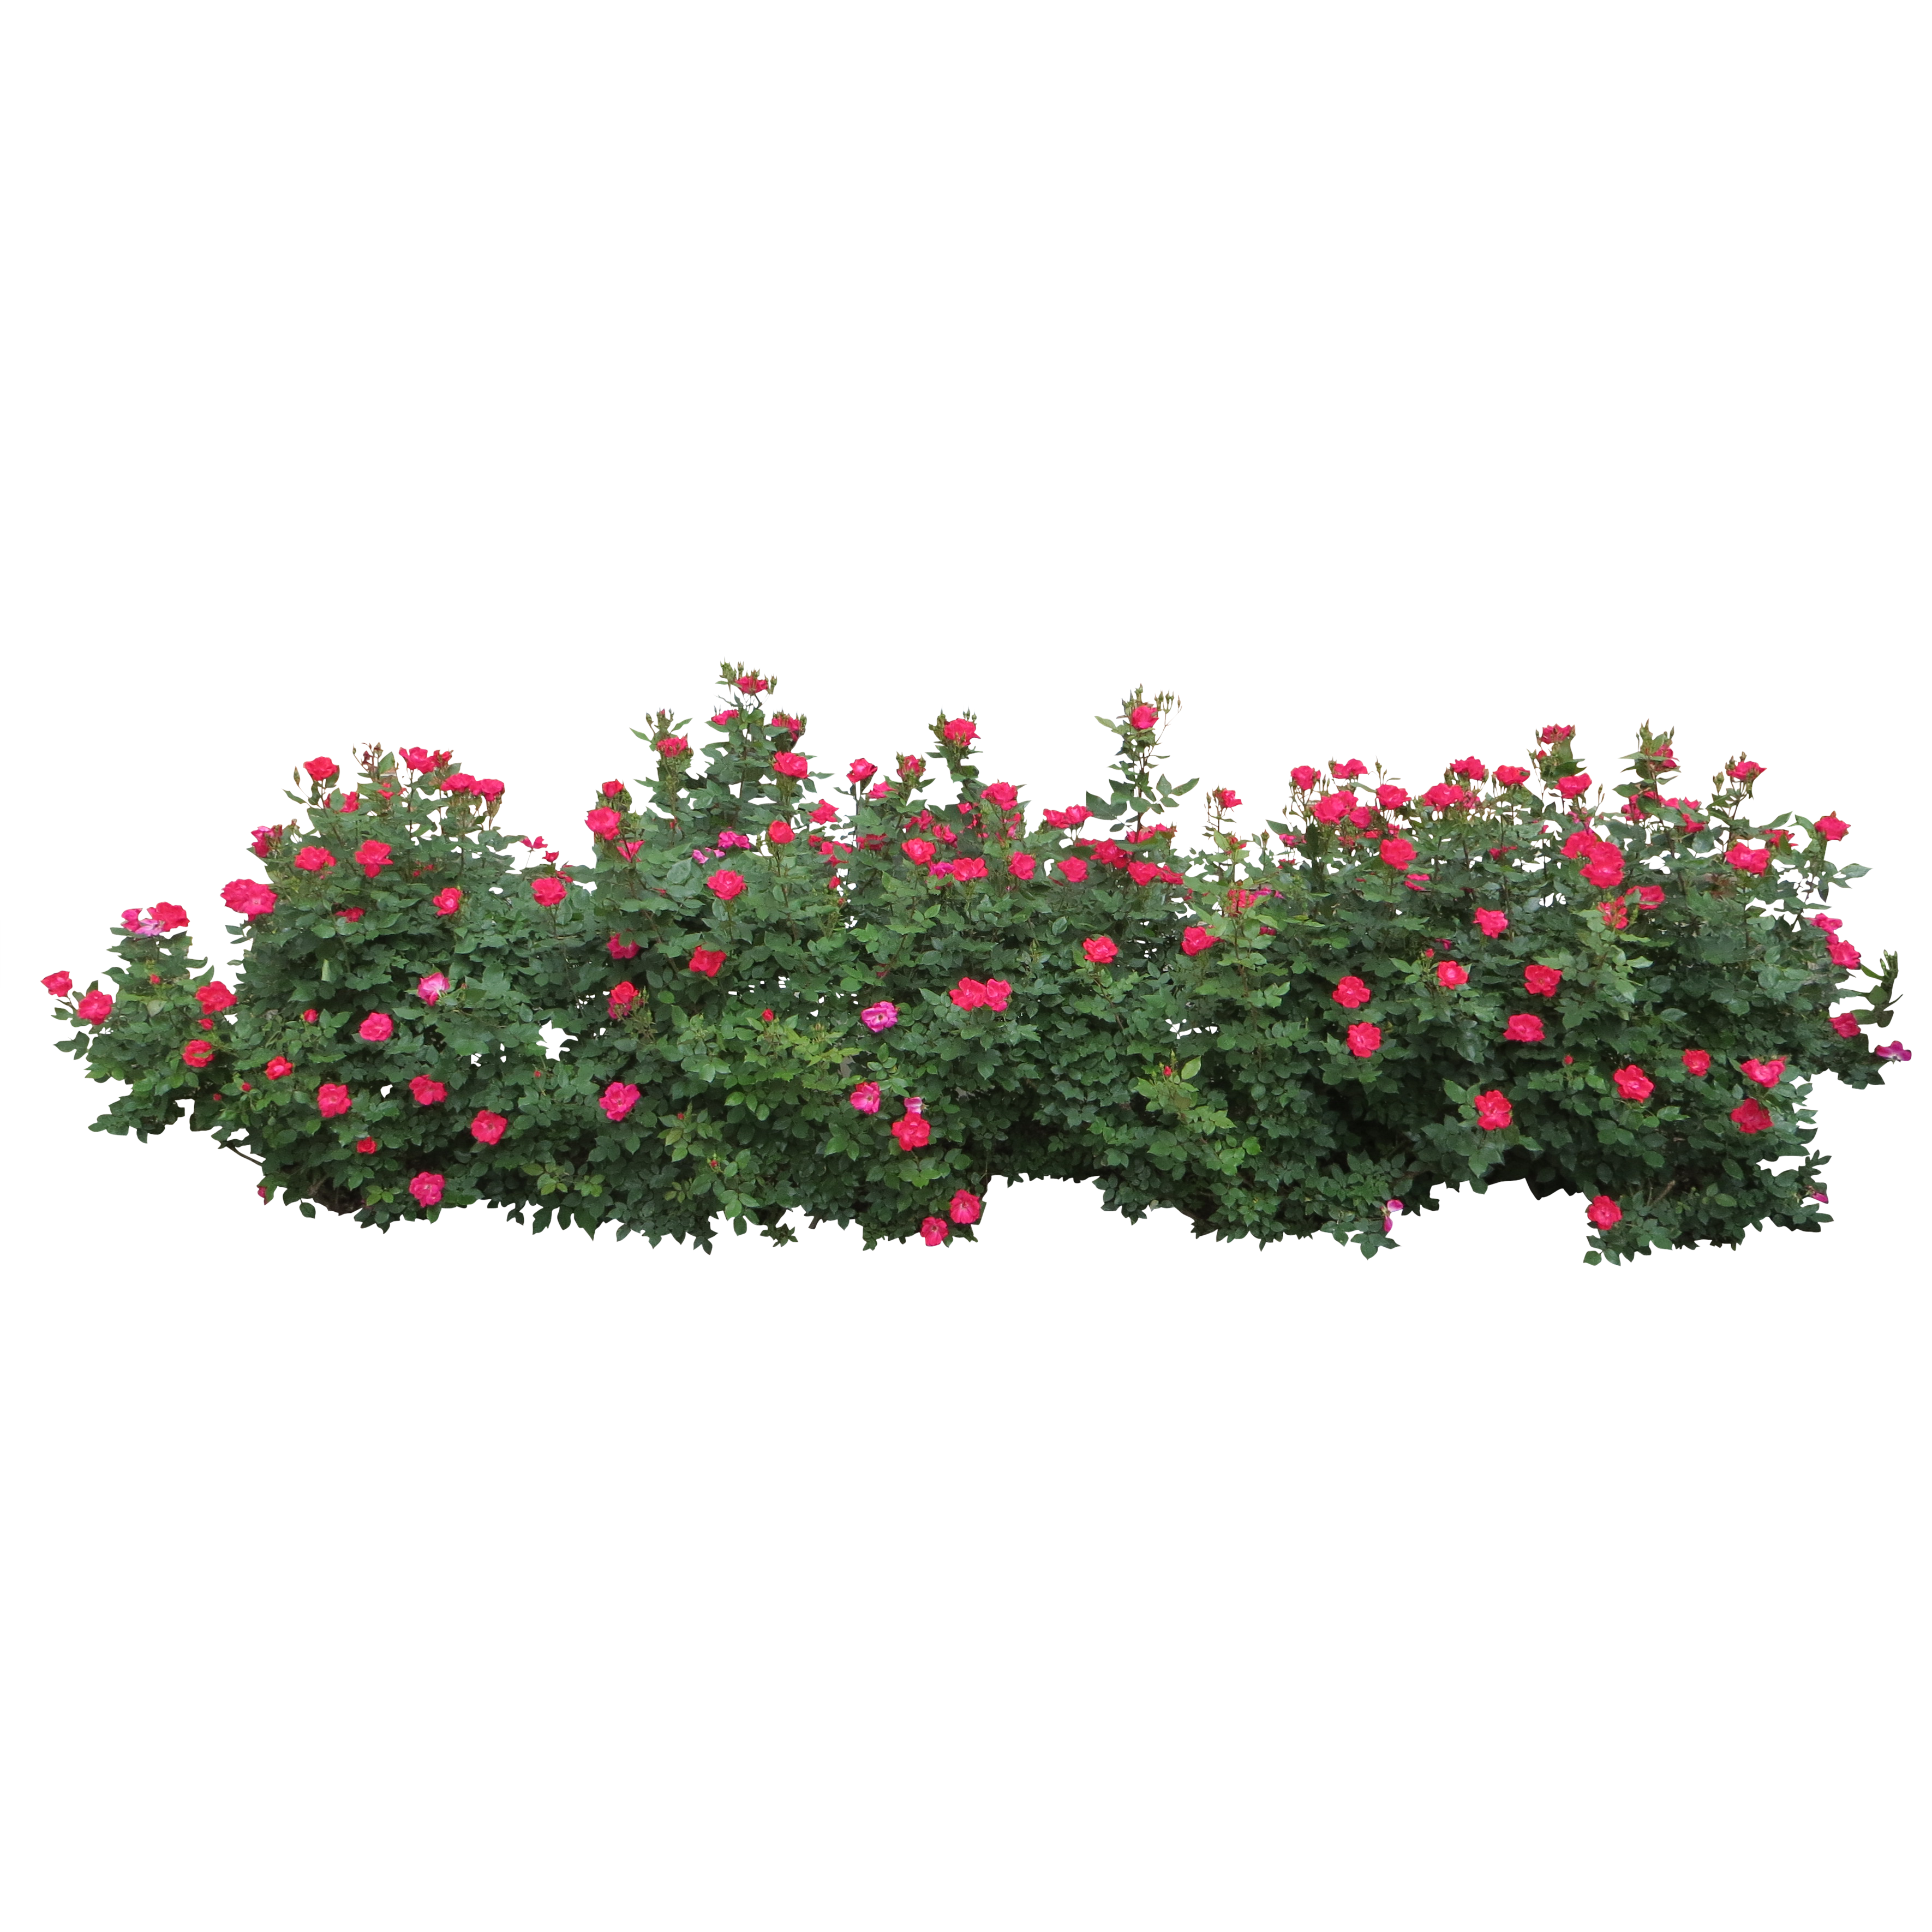 Centifolia roses shrub tree. Png images for photoshop